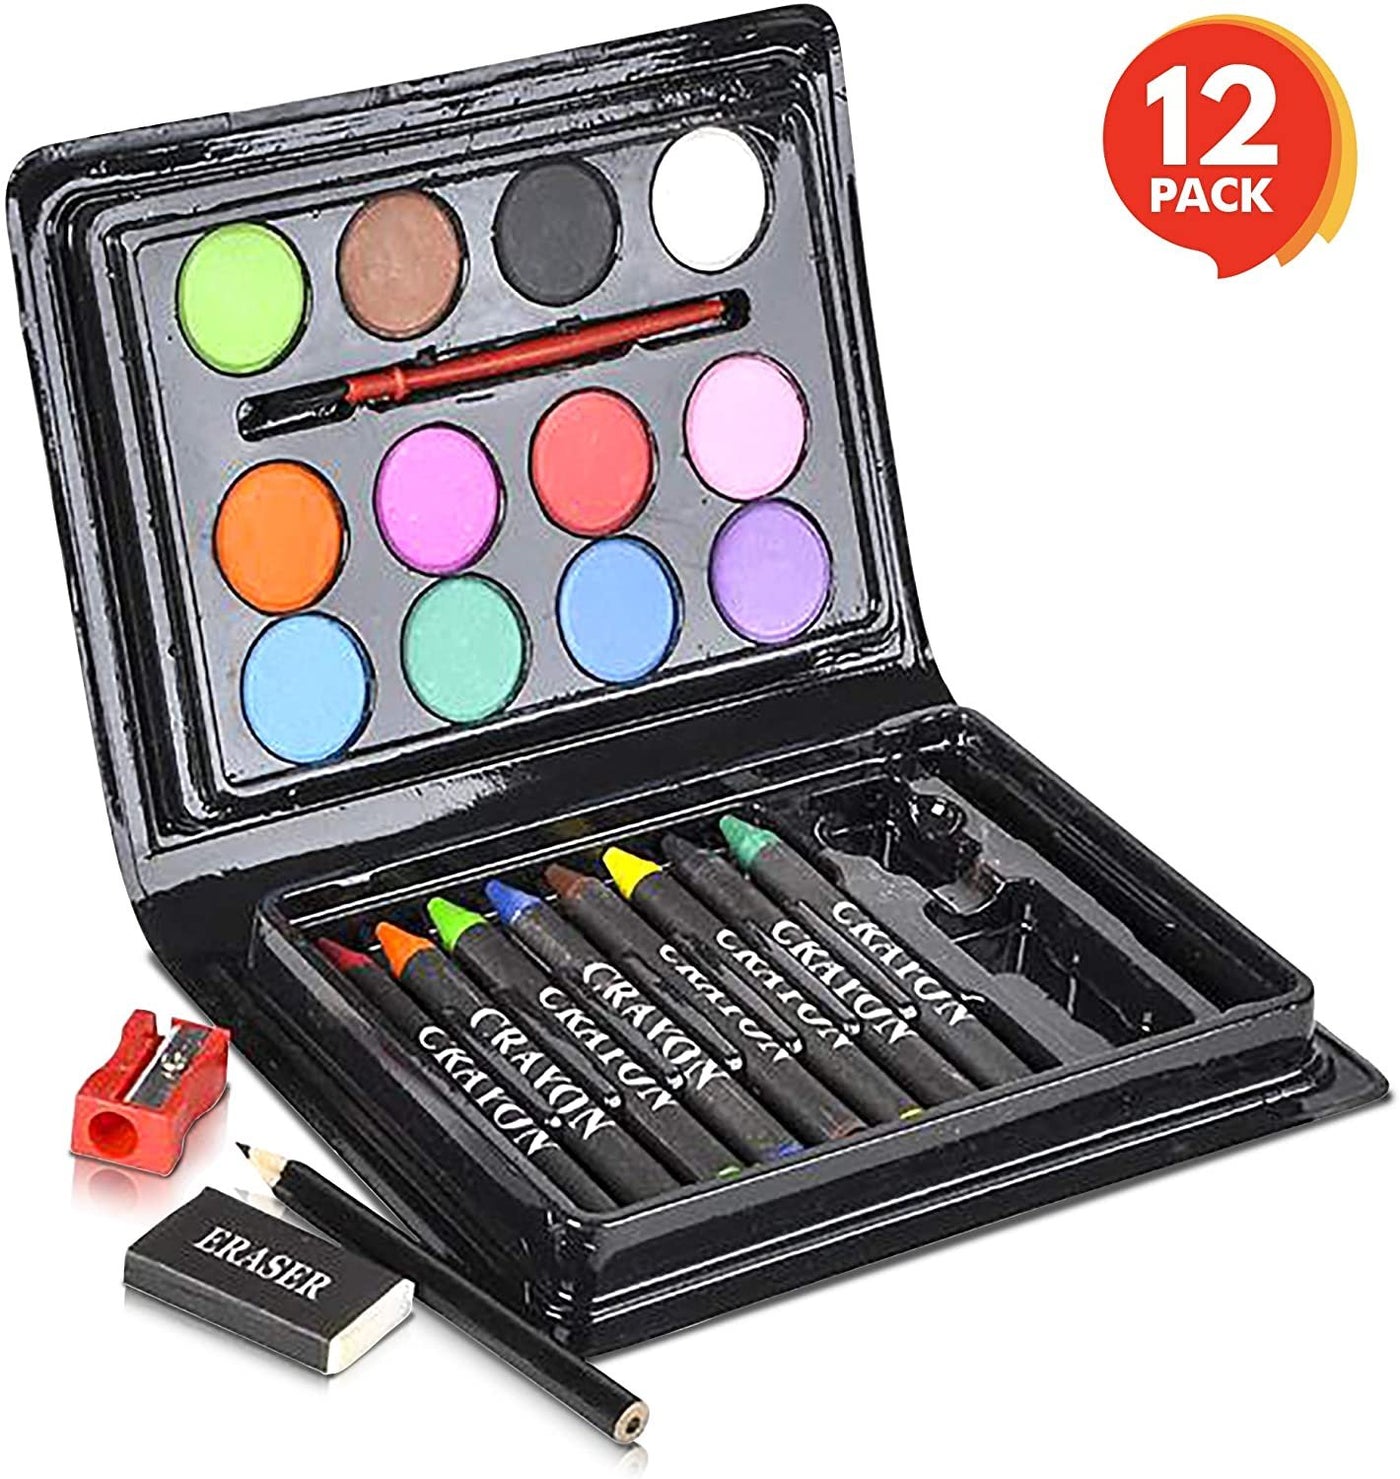 ArtCreativity Deluxe Art Set for Kids by Art Creativity - Ideal Beginner Artist Kit Includes 101 Pieces - Watercolor, Crayons, Colored Markers, Color